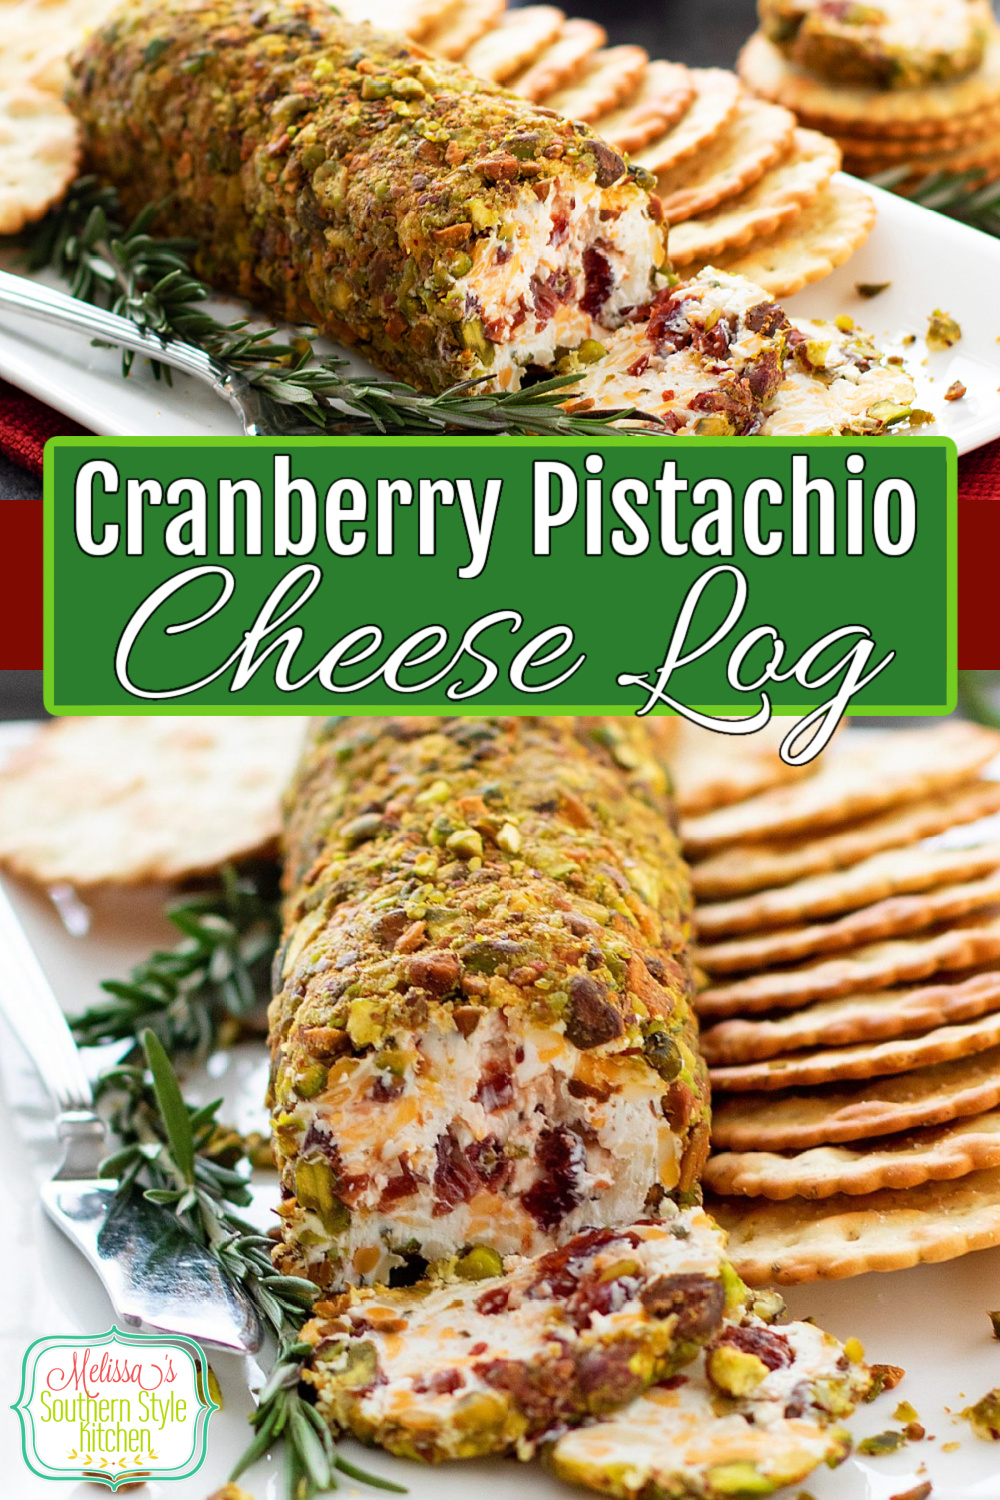 This Easy Cranberry Pistachio Cheese Log is filled with seasonal flavors and it comes together in a snap #cranberrycheeselog #cranberrypistachiocheeselog #appetizers #holidayrecipes #pistachiocheeselog #Christmasrecipes #cranberries #cheese #southernfood #southernrecipes #easyappetizerrecipes via @melissasssk